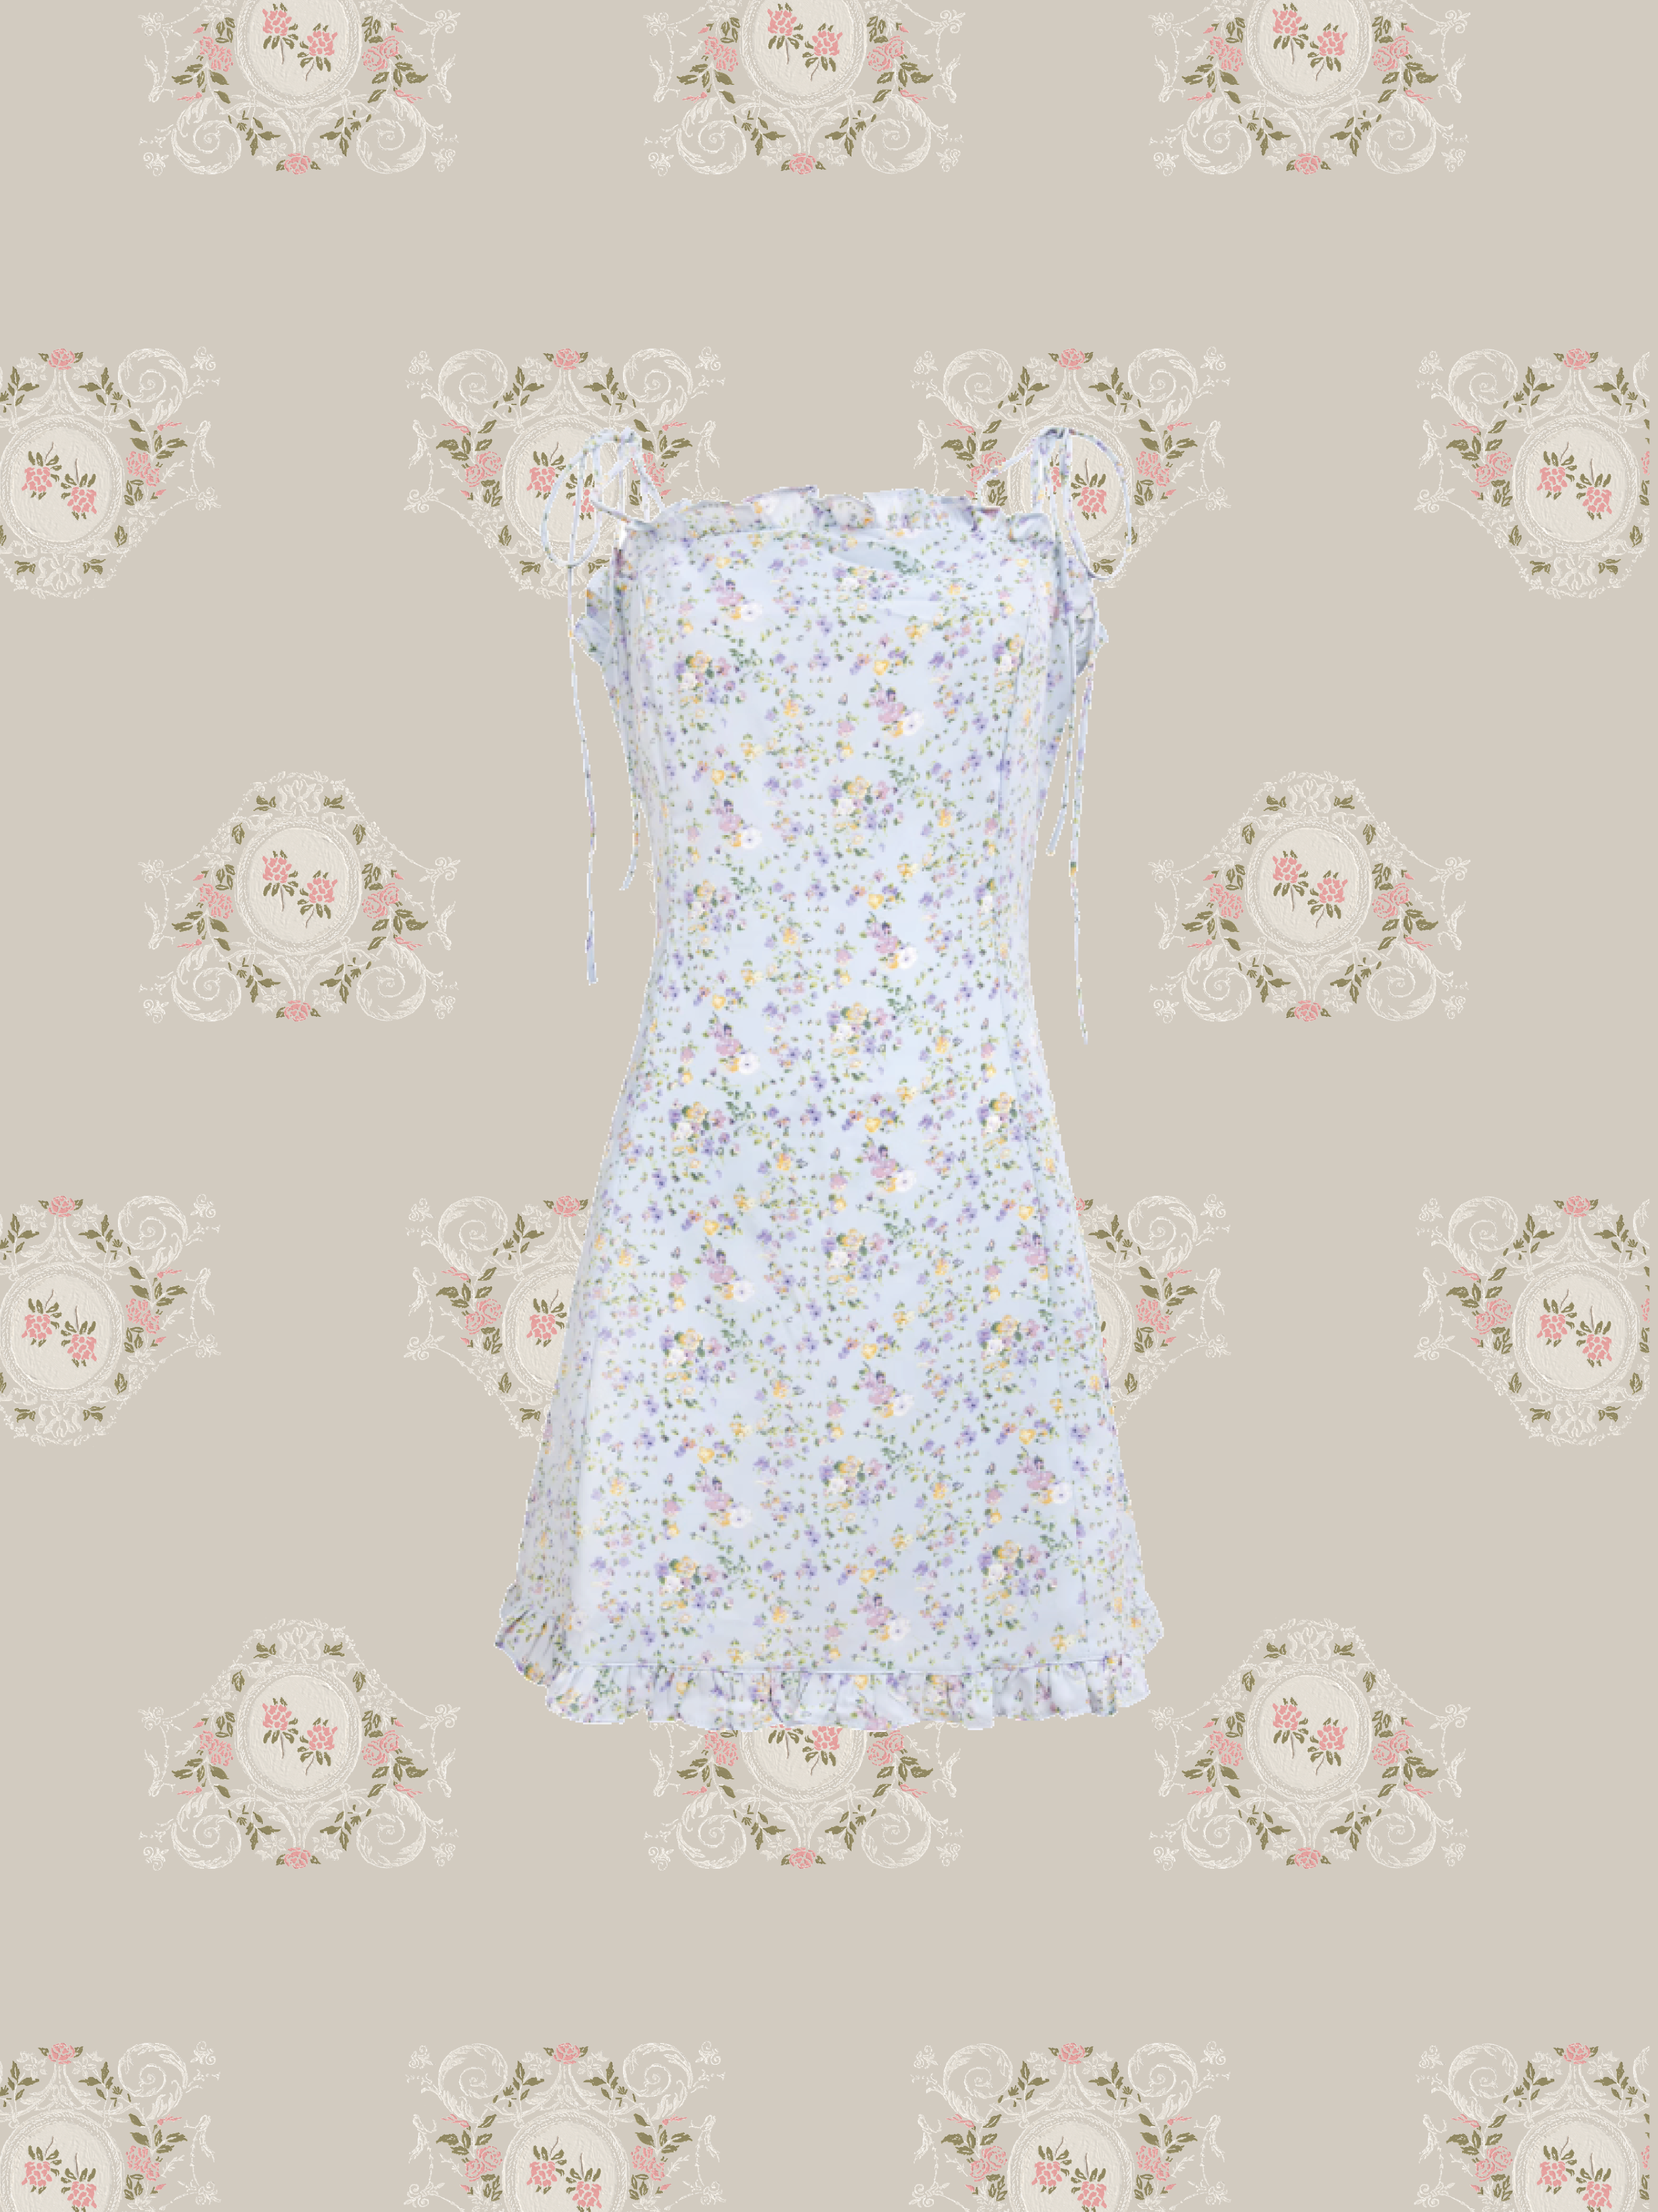 French Floral One Piece With Turban ターバン付きフレンチフラワーワンピース